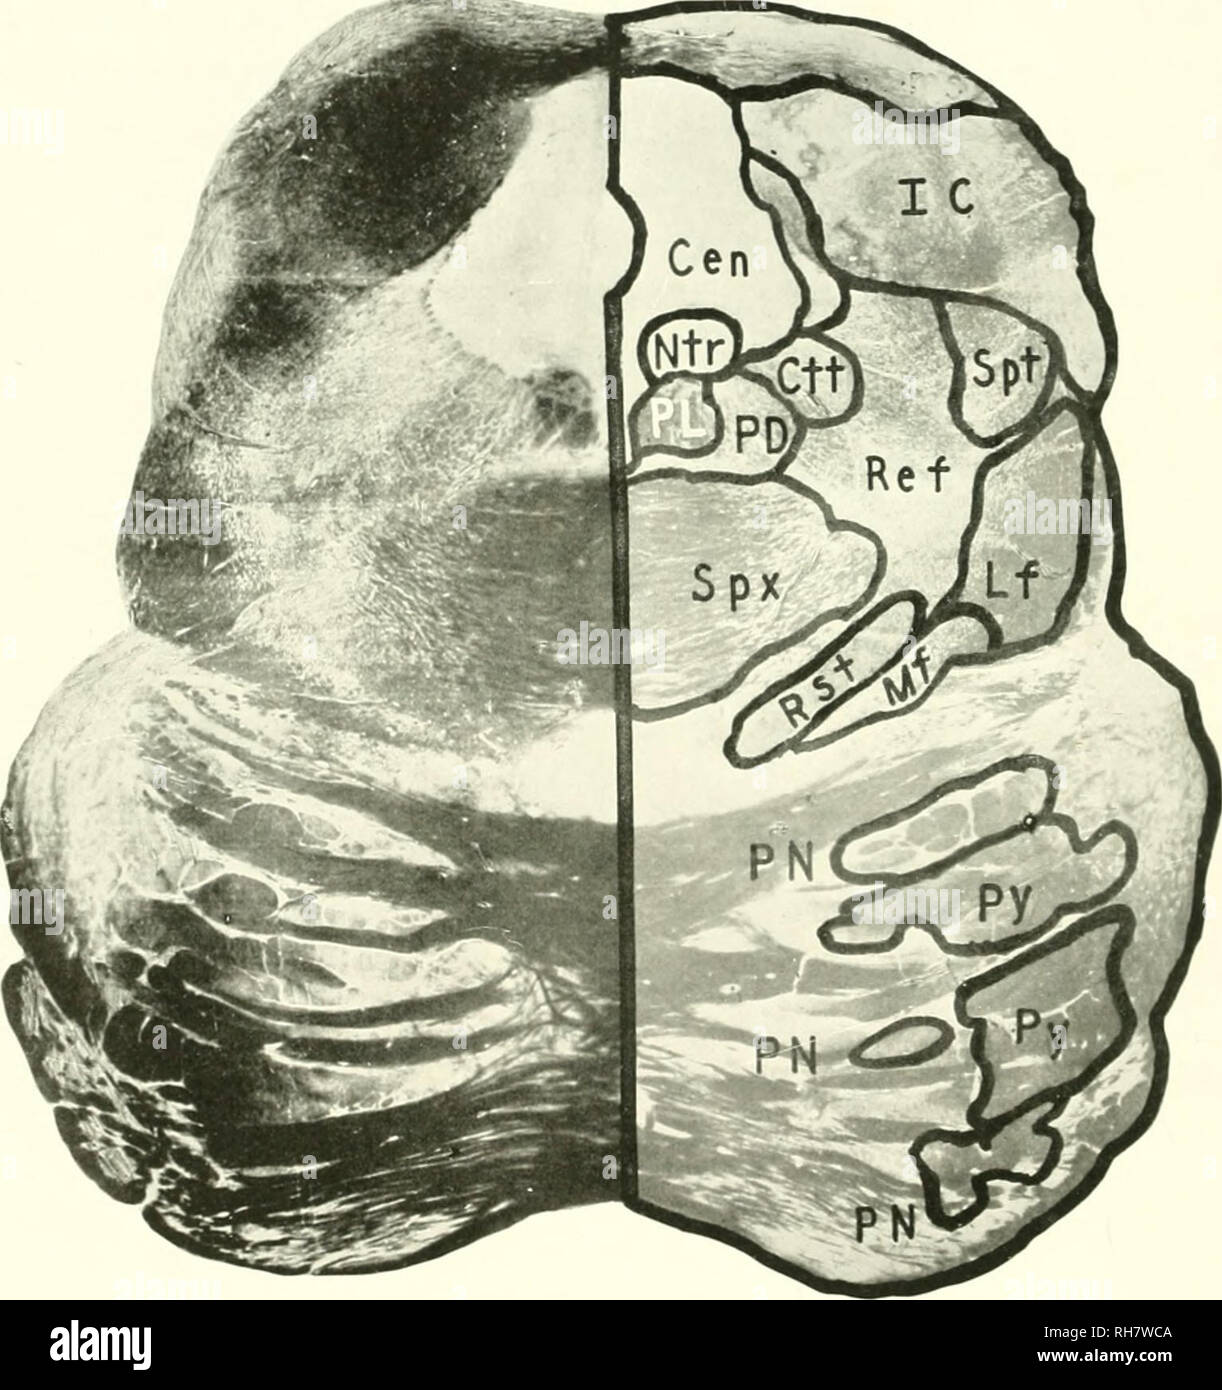 . The brain from ape to man; a contribution to the study of the evolution and development of the human brain. Brain; Evolution; Pongidae. FIG. 308. CORILLA. LE EL Ol- THE INFERIOR COLLICULUS. CEN, Central Gray Matter; err. Central Tegmental Tract; ic. Inferior Colliculus; if. Lateral Fillet; mf, Mesial Fillet; ntr. Trochlear Nucleus; i&gt;d, Predorsal Bundle; i&gt;l. Posterior Longitudinal Fasciculus; I'N, Pontile Nuclei; i&gt;Y, Pyramid; ref, Reticular Formation; kst, Rubrospinal Tract; spt. Spinothalamic Tract; si&gt;x. Crossing of Superior Cerebellar Peduncle. [Accession No. .1. D. Section Stock Photo